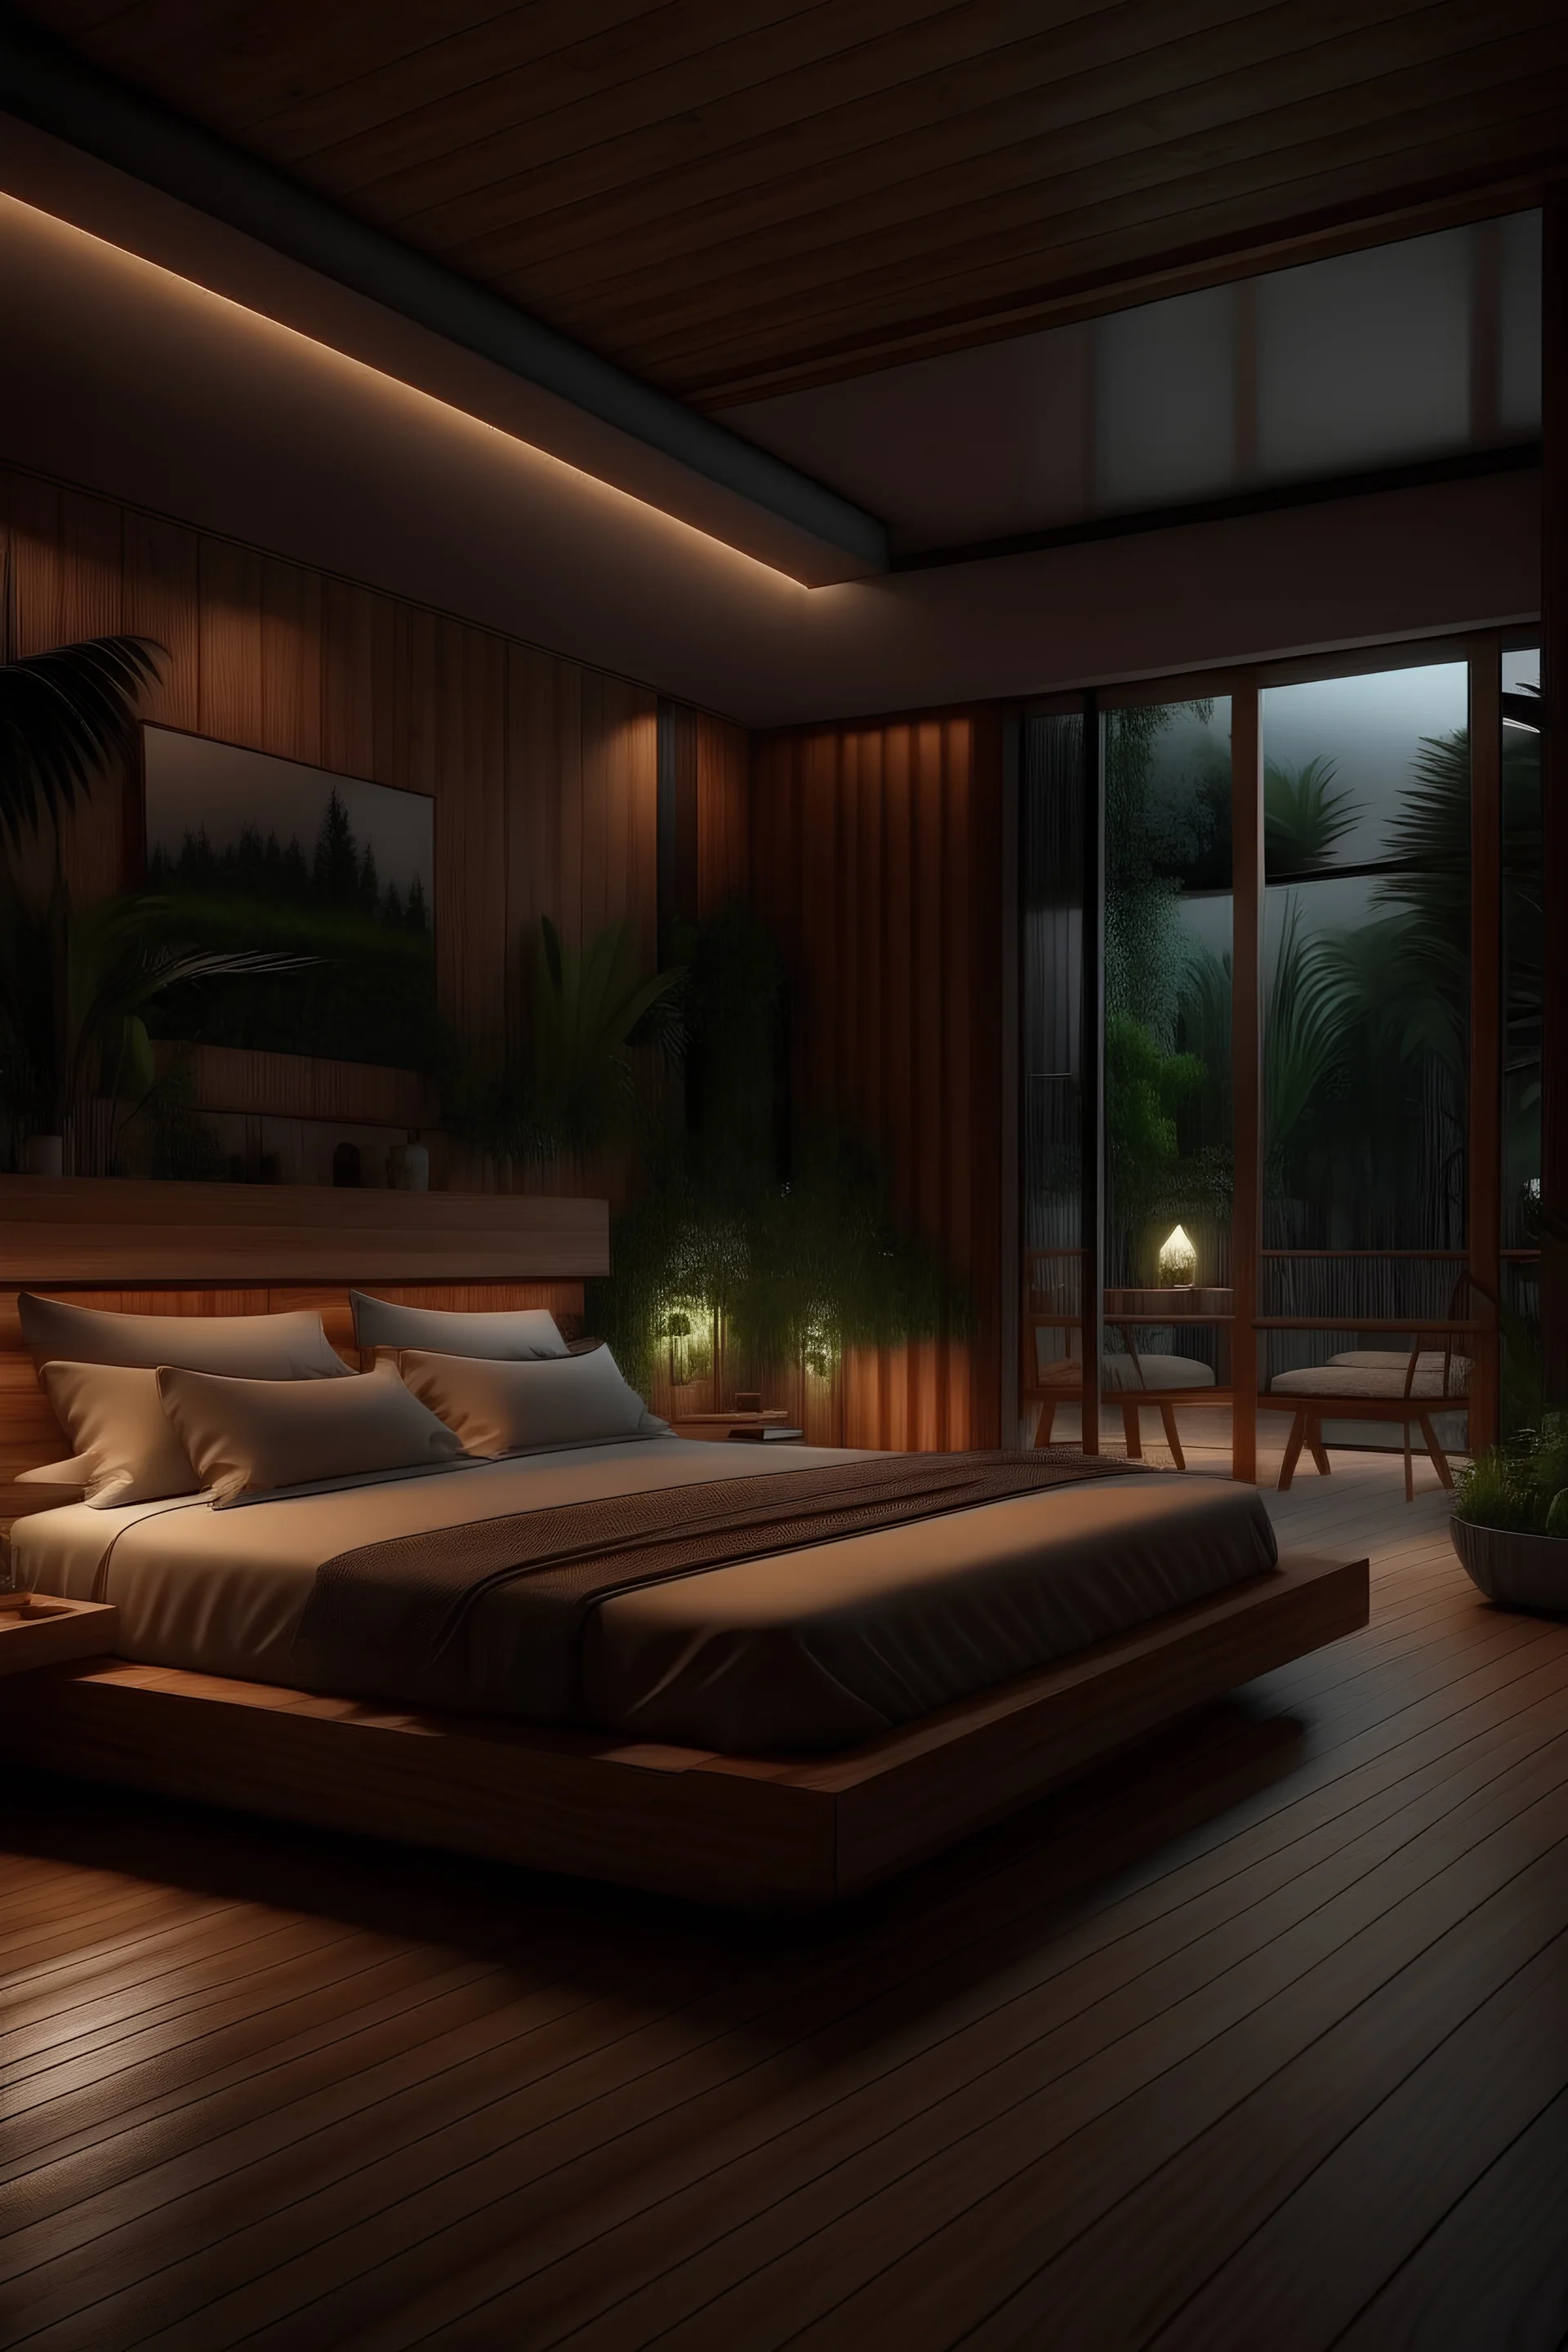 Generate a bedroom at night, with windows, made out of wood, night tables, a big bed, vegetation and a tv. With interior design and attention to details.